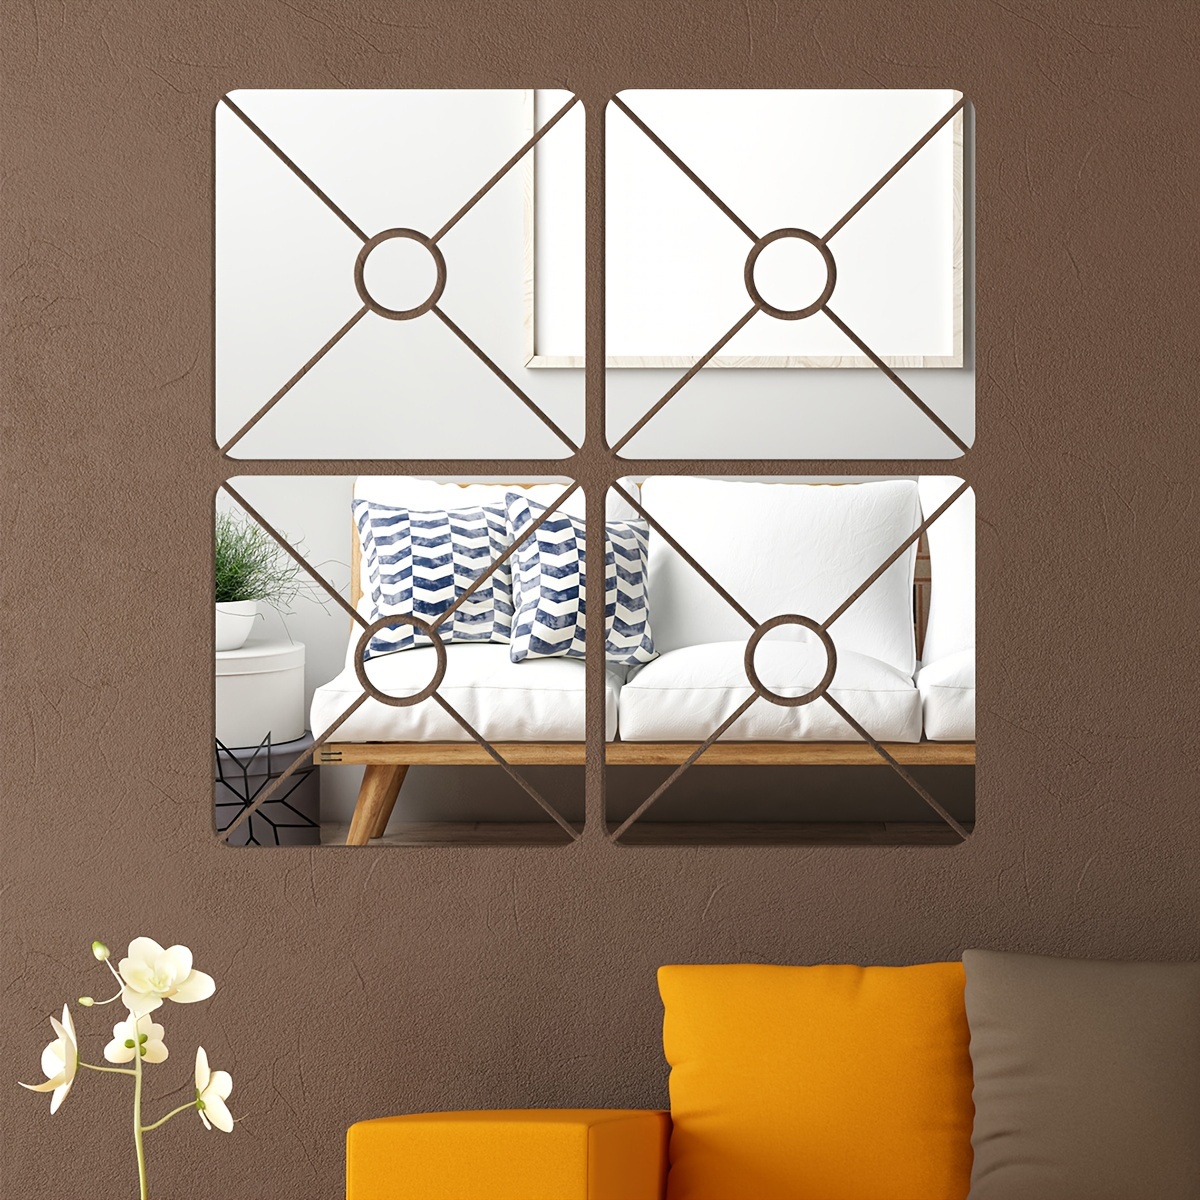  3D Mirror Wall Stickers, 4 Pcs Acrylic Square